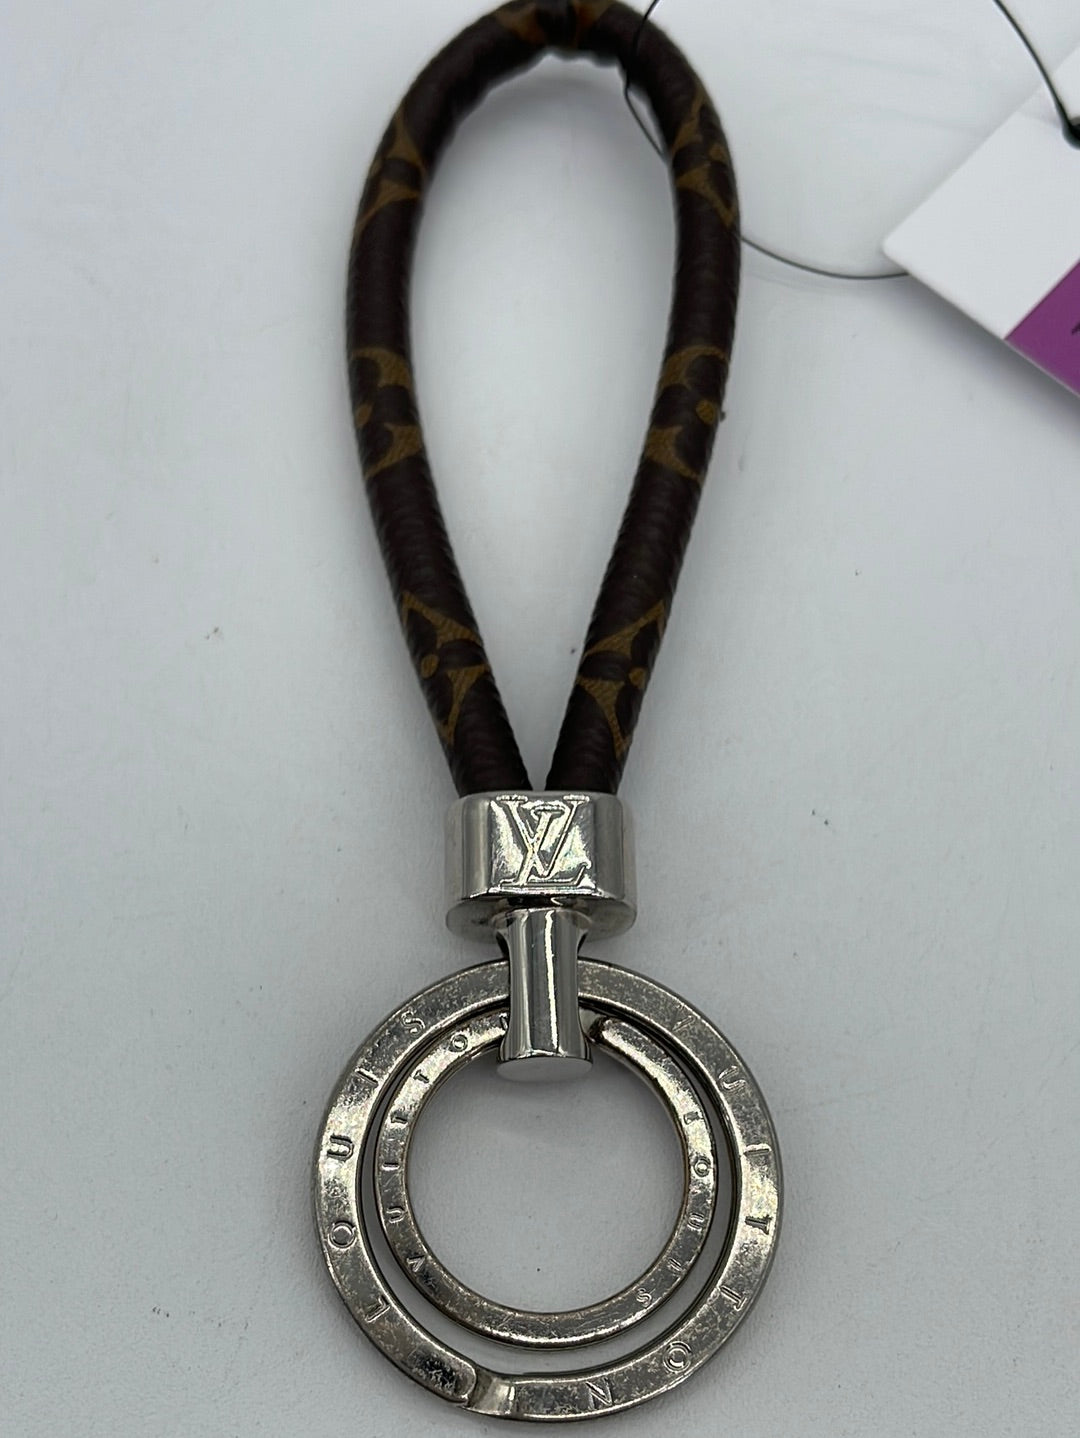 Louis-Vuitton Monogram Locket Necklace. Picture Holder with an